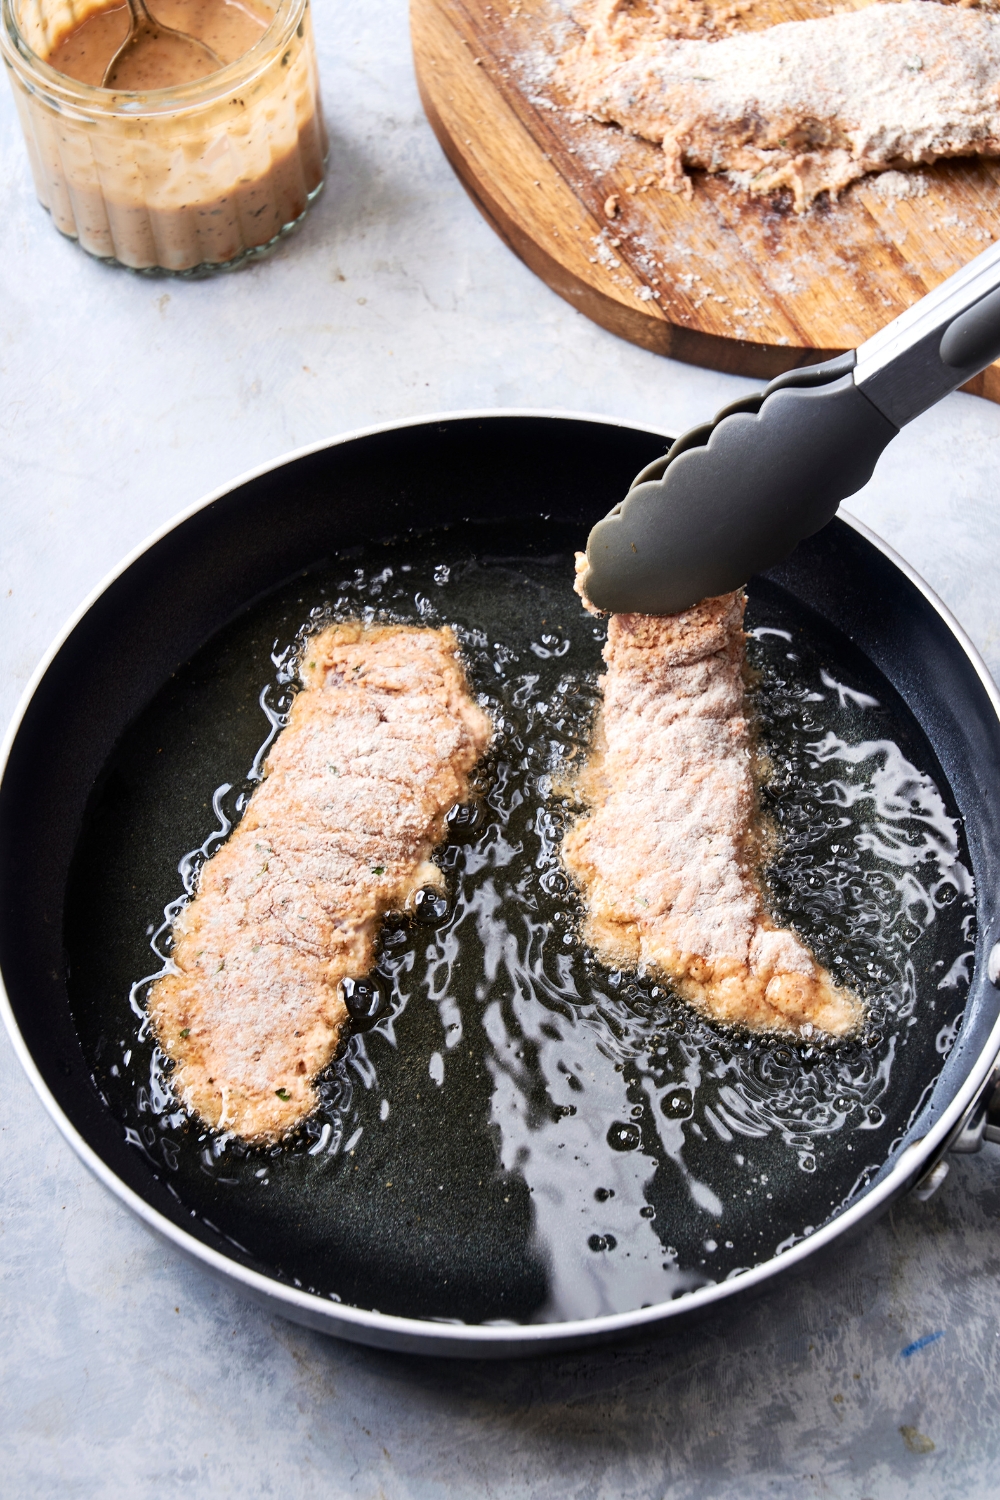 A frying pan with hot oil cooking the coated chicken tenders.